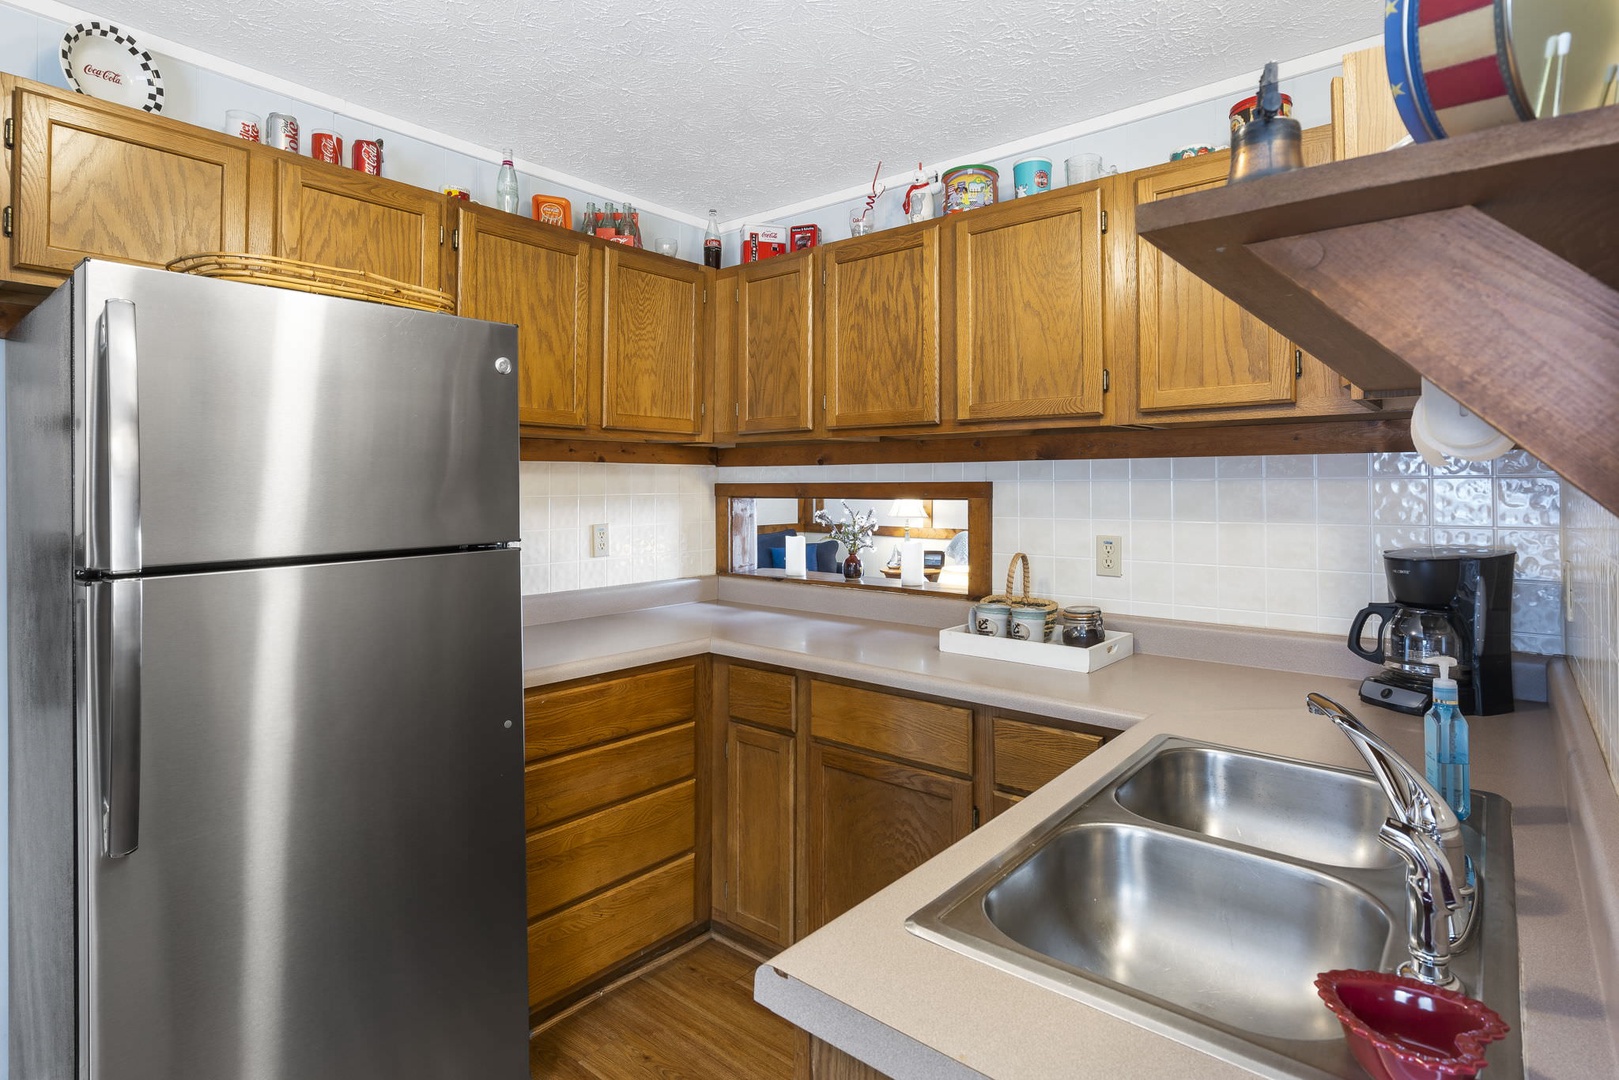 Unit 114 - Fully equipped kitchen